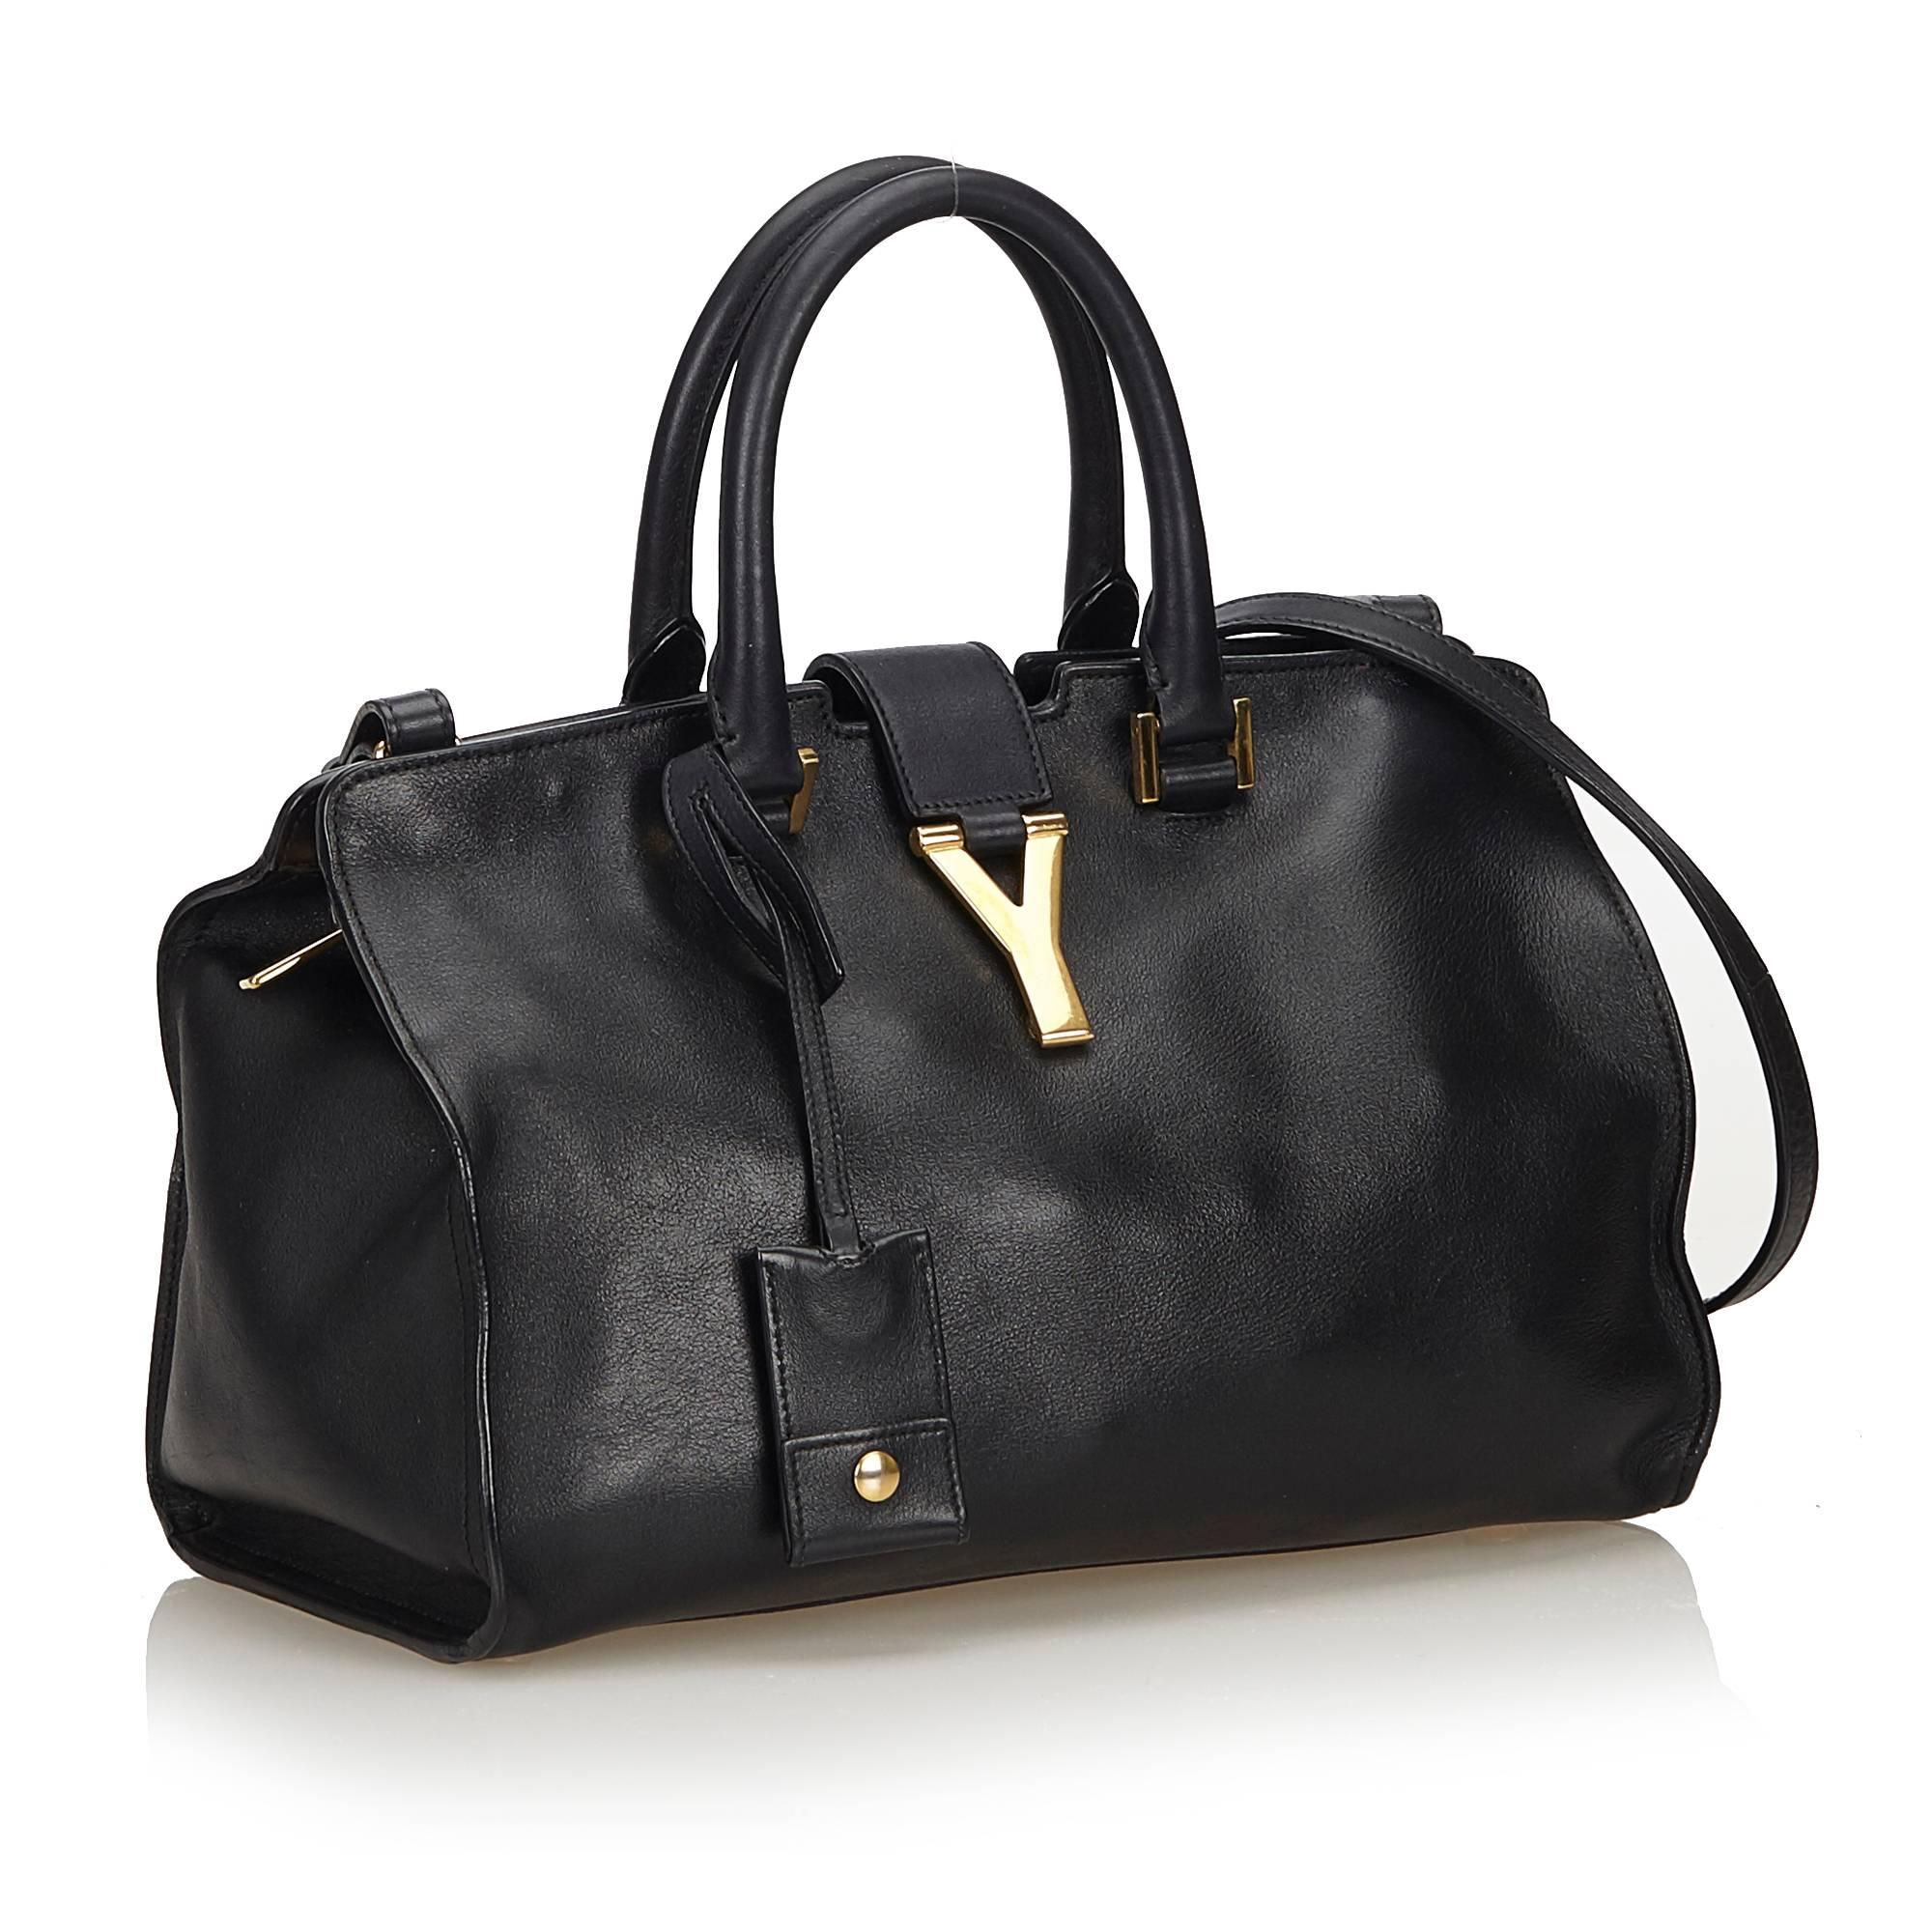 The Cabas Chyc features a calf leather body, rolled handles, a top strap with gold-tone Y hardware, a top zip closure, and an interior zip pocket.

It carries an AB condition rating.Item is slightly out of shape. 

Dimensions: 
Length 20 cm
Width 30